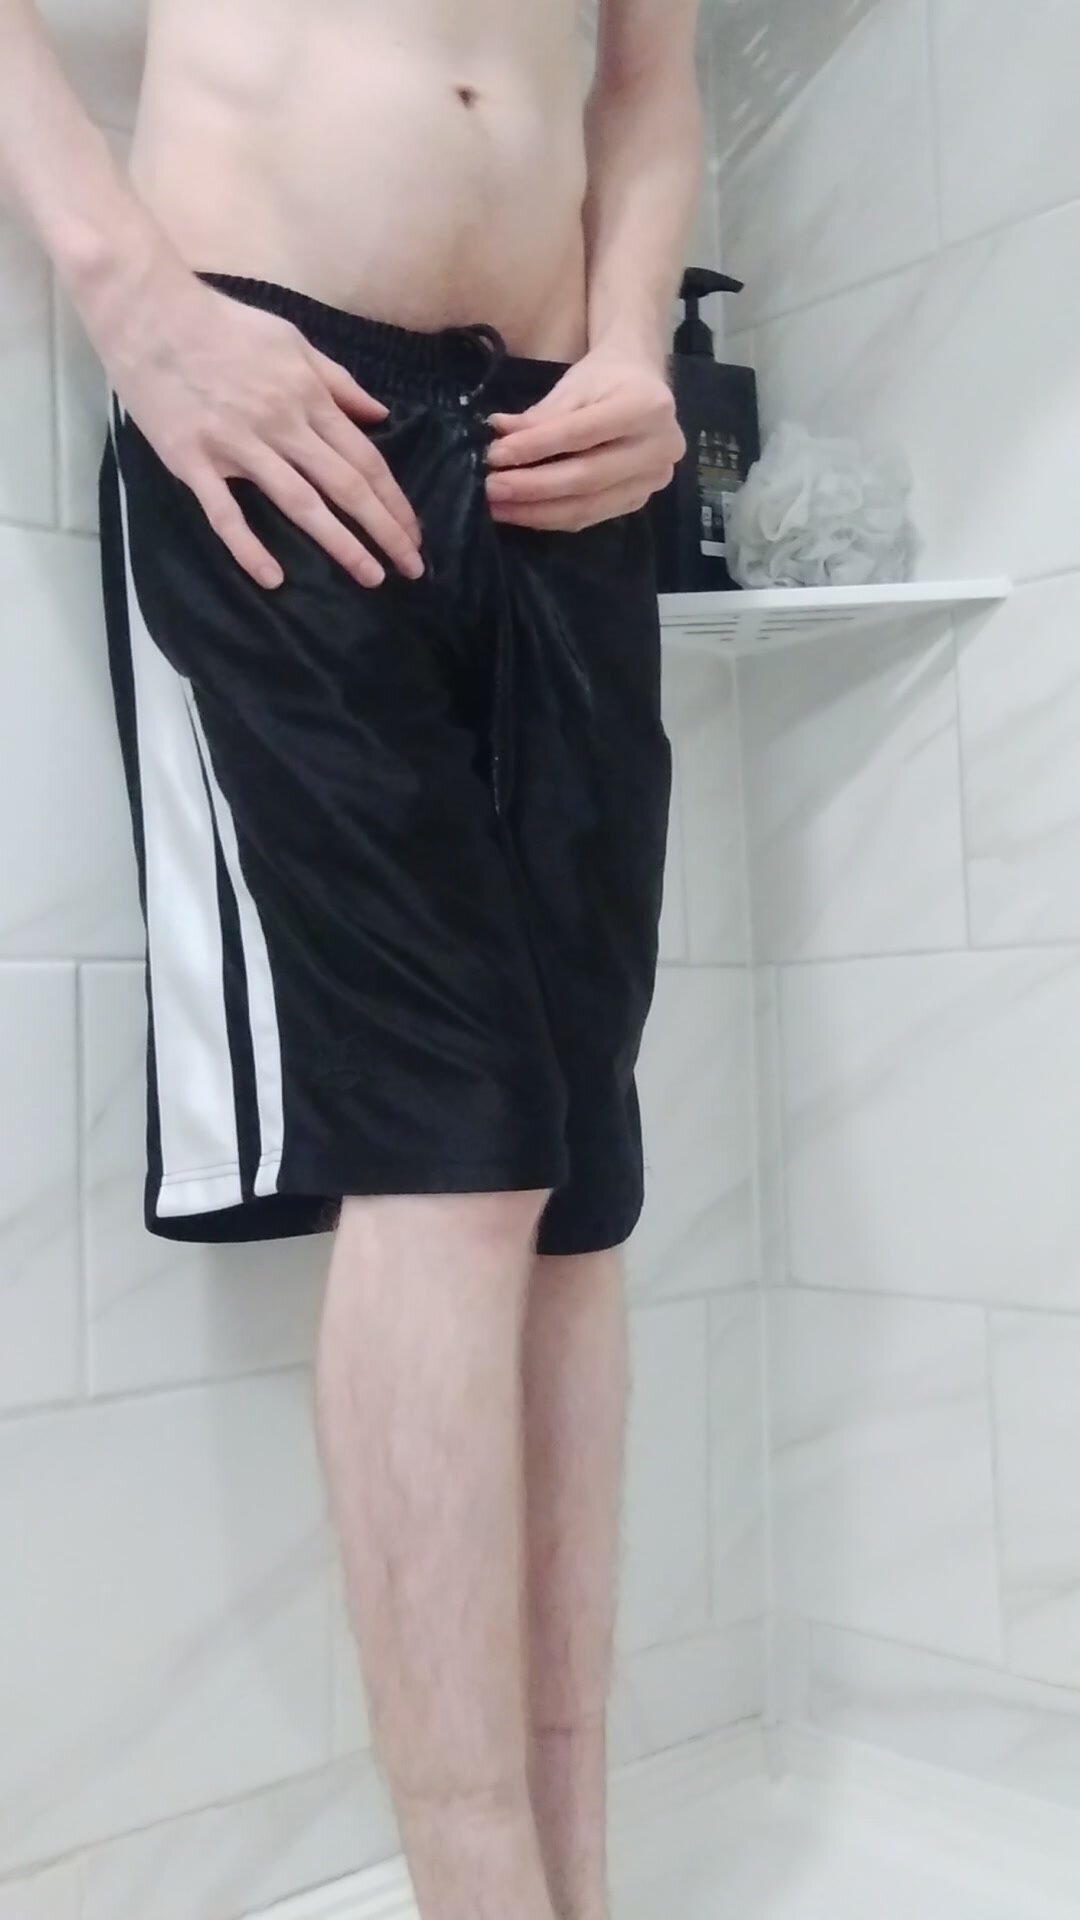 1st pissing in my everlast shorts